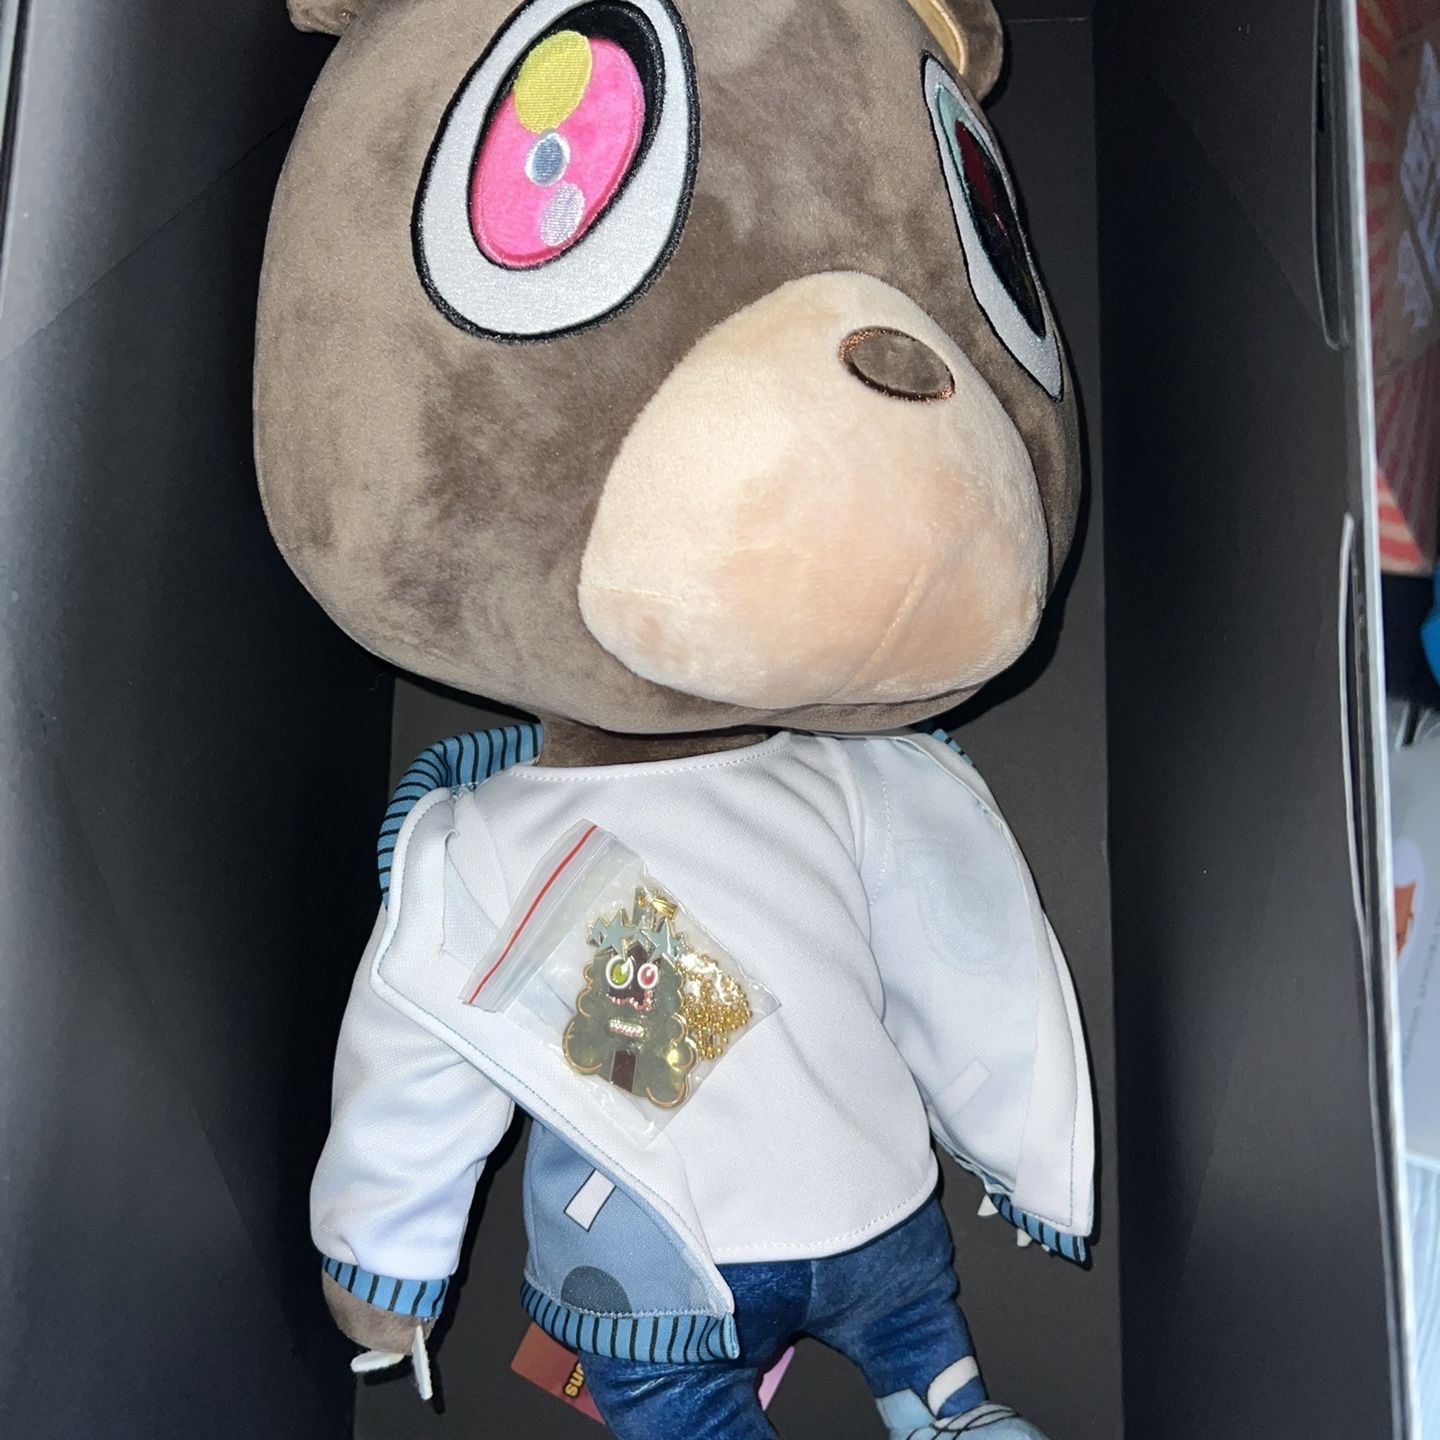 Gredee arts kanye west graduation 18 in bear plush soldout collectible